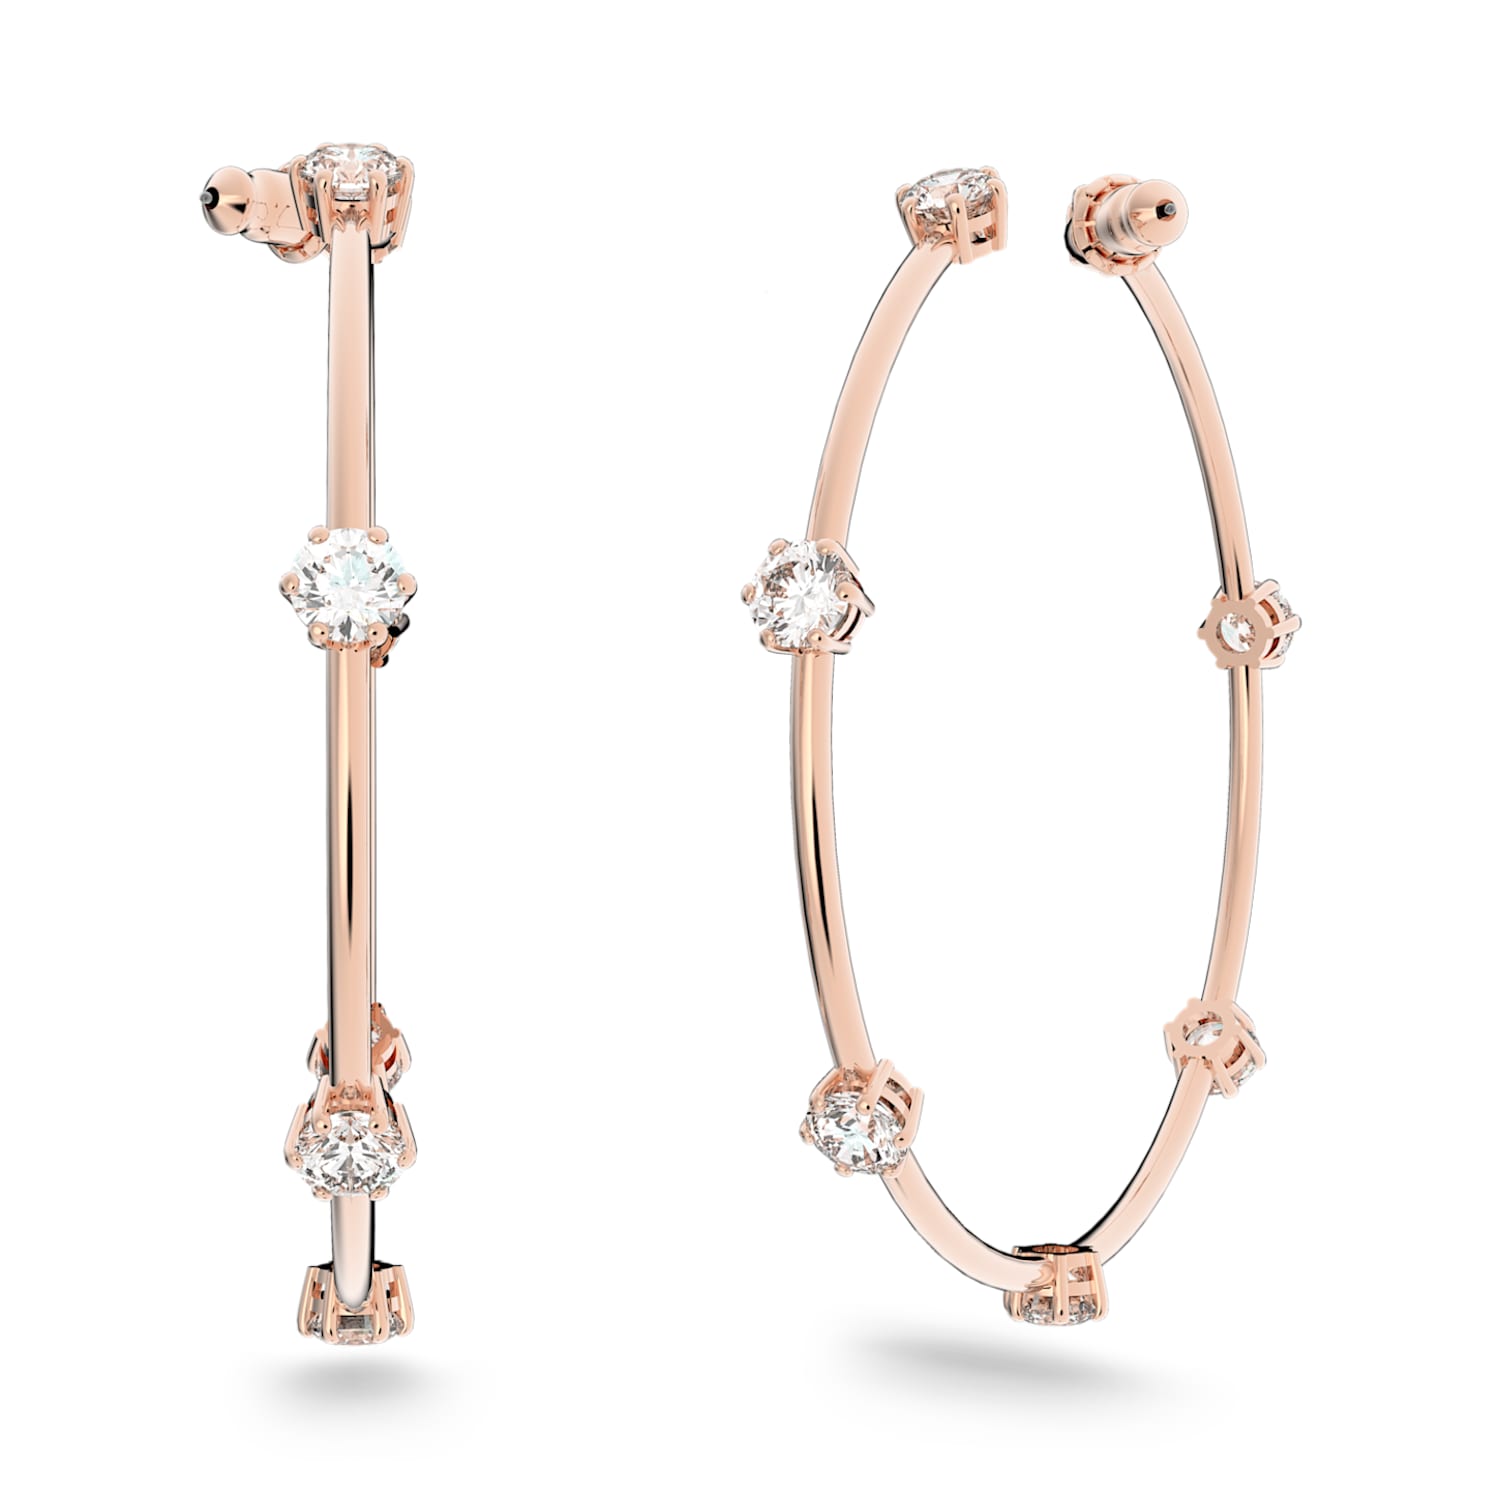 Constella hoop earrings, Round cut, White, Rose gold-tone plated